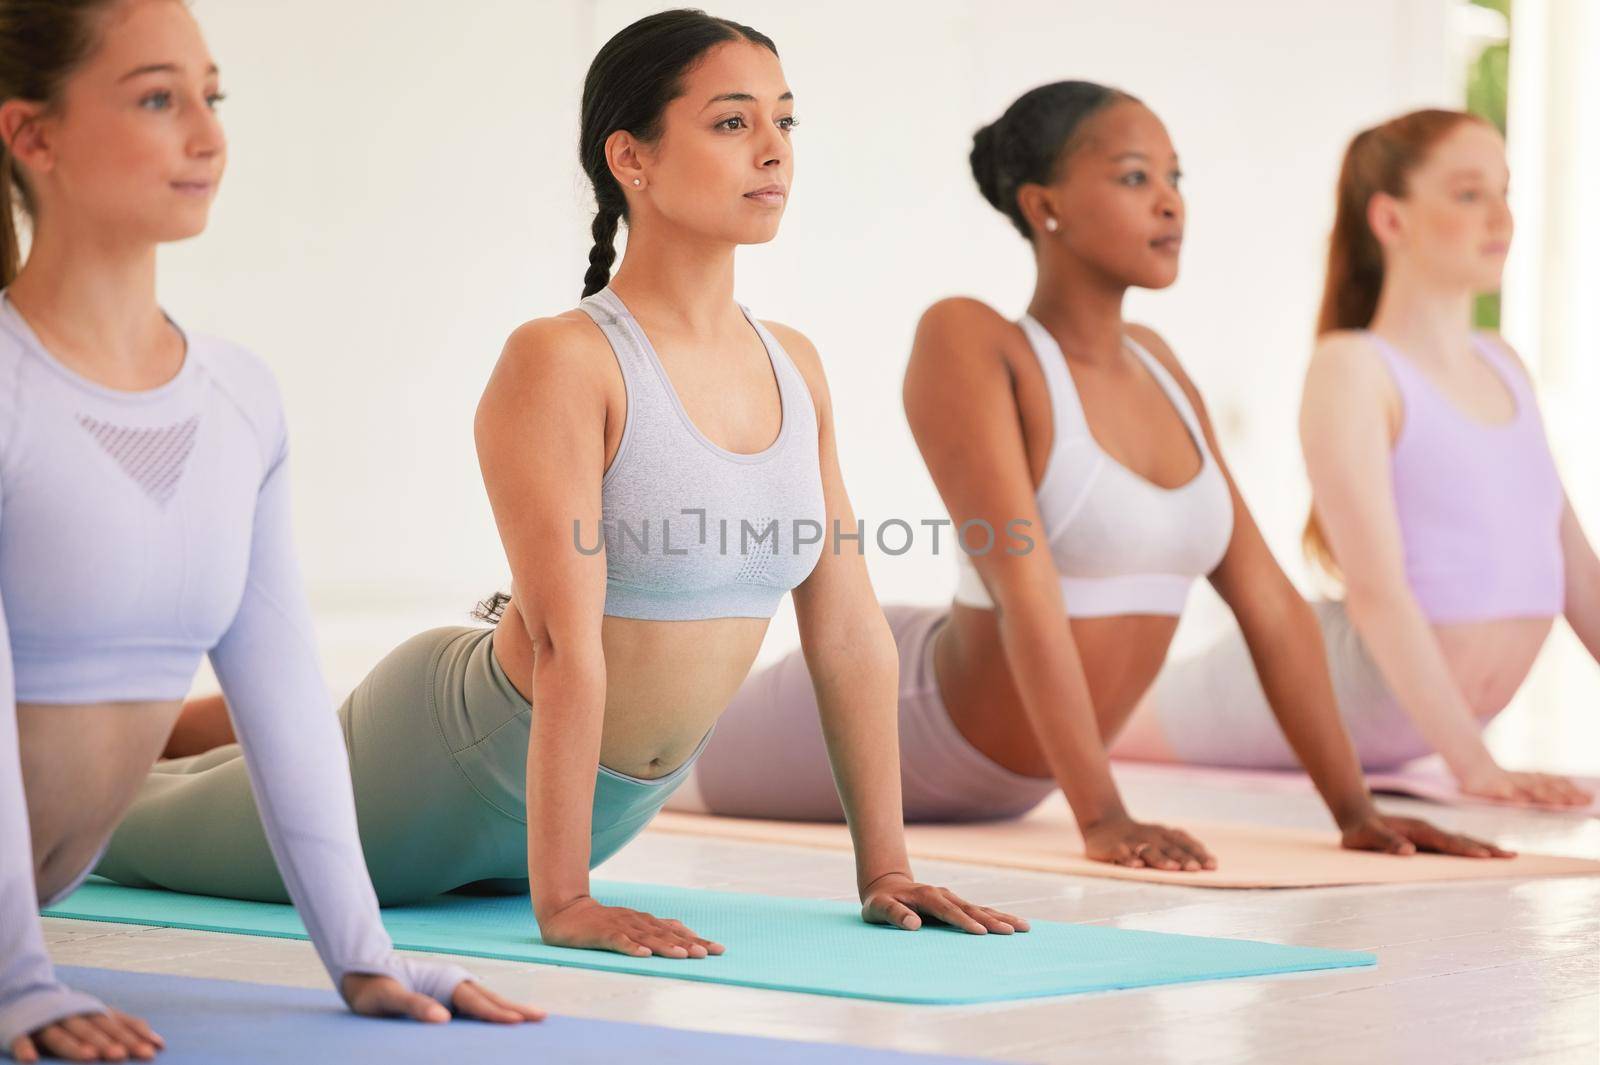 Yoga, stretching or pilates friends class for diverse group of women in upward facing dog pose in studio. Fit, calm or zen and serene or relaxed females in healthy holistic exercise for back mobility by YuriArcurs